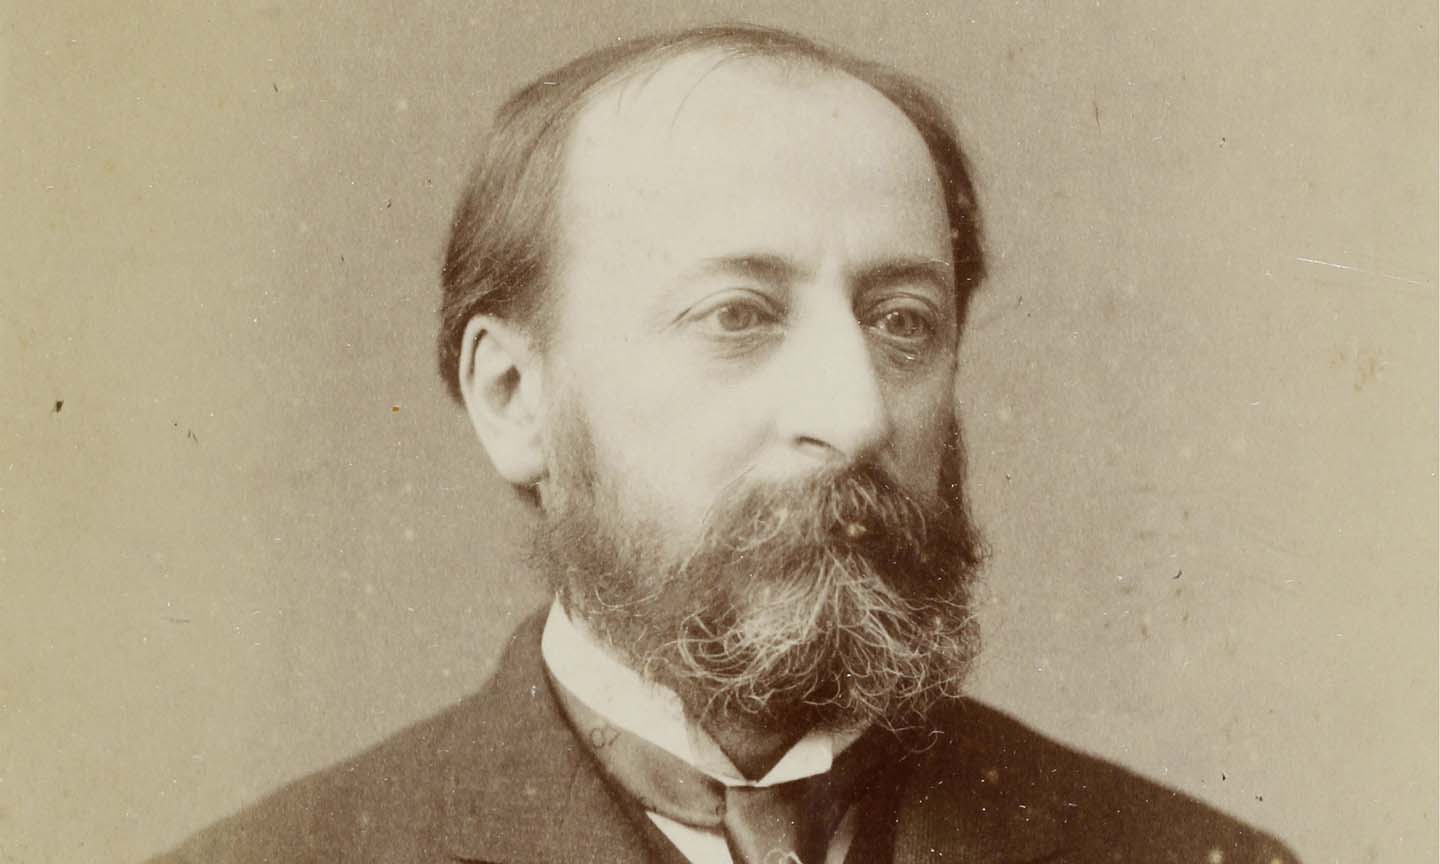 Saint-Saëns: Facts, pronuncation, works and more about the great composer -  Classic FM